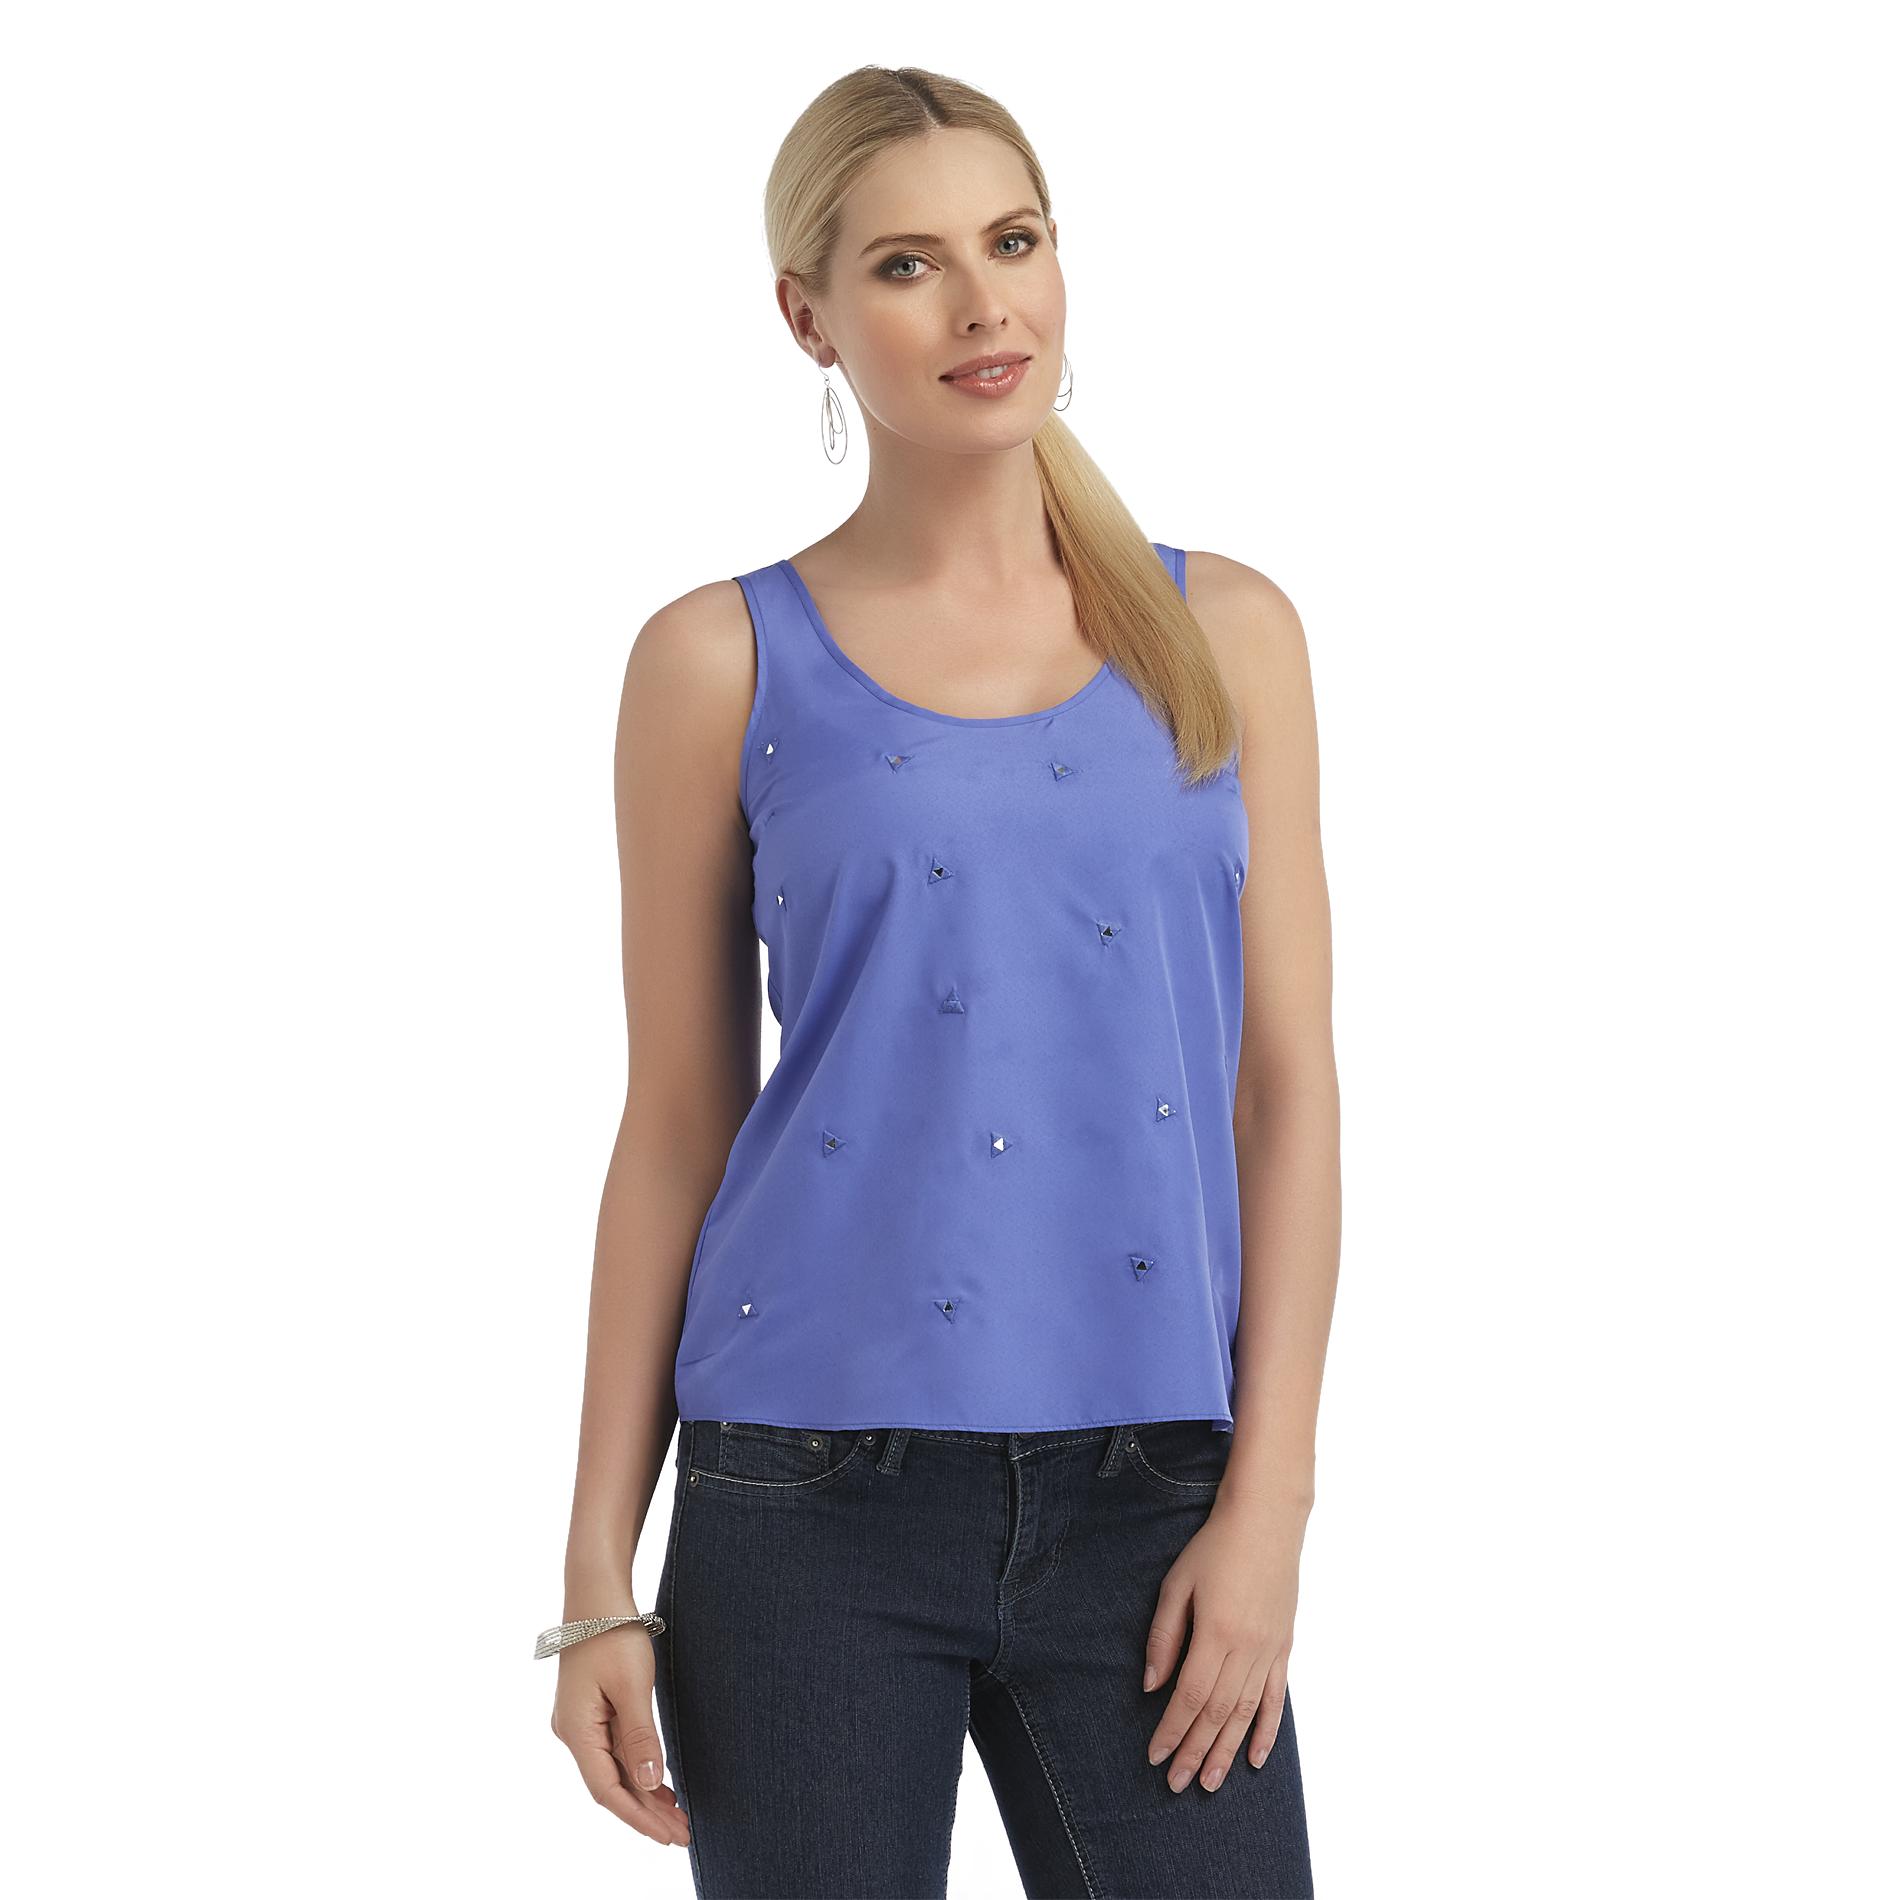 Attention Women's Embellished Tank Top